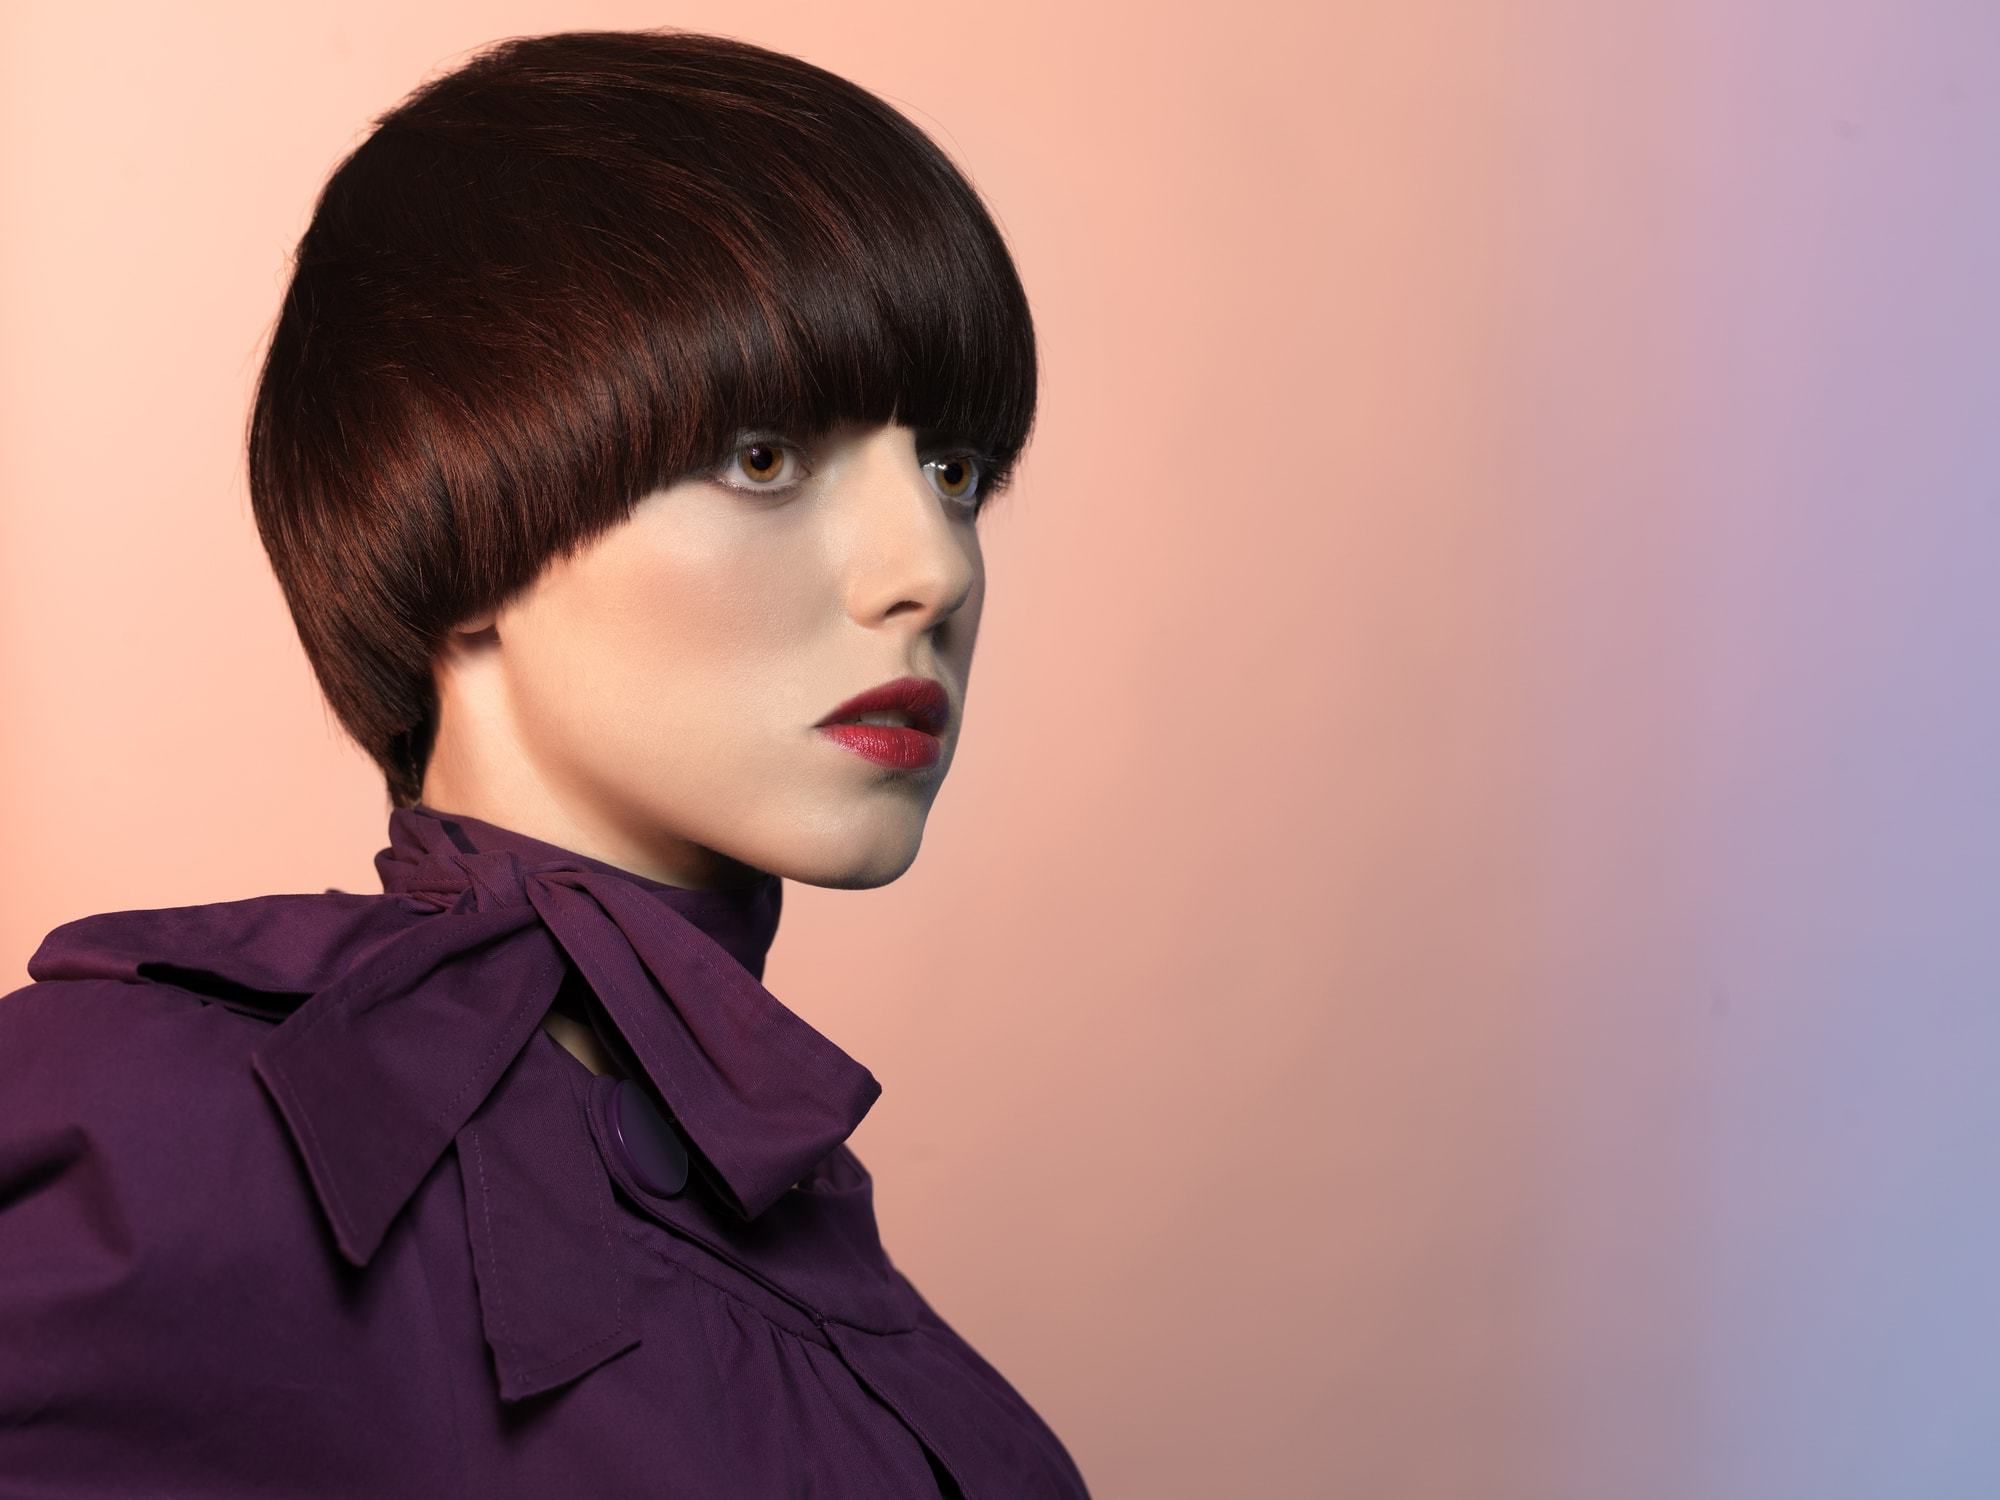 15 Short Haircuts For Oval Faces To Try Any Season Throughout Short Haircut Oval Face (View 9 of 25)